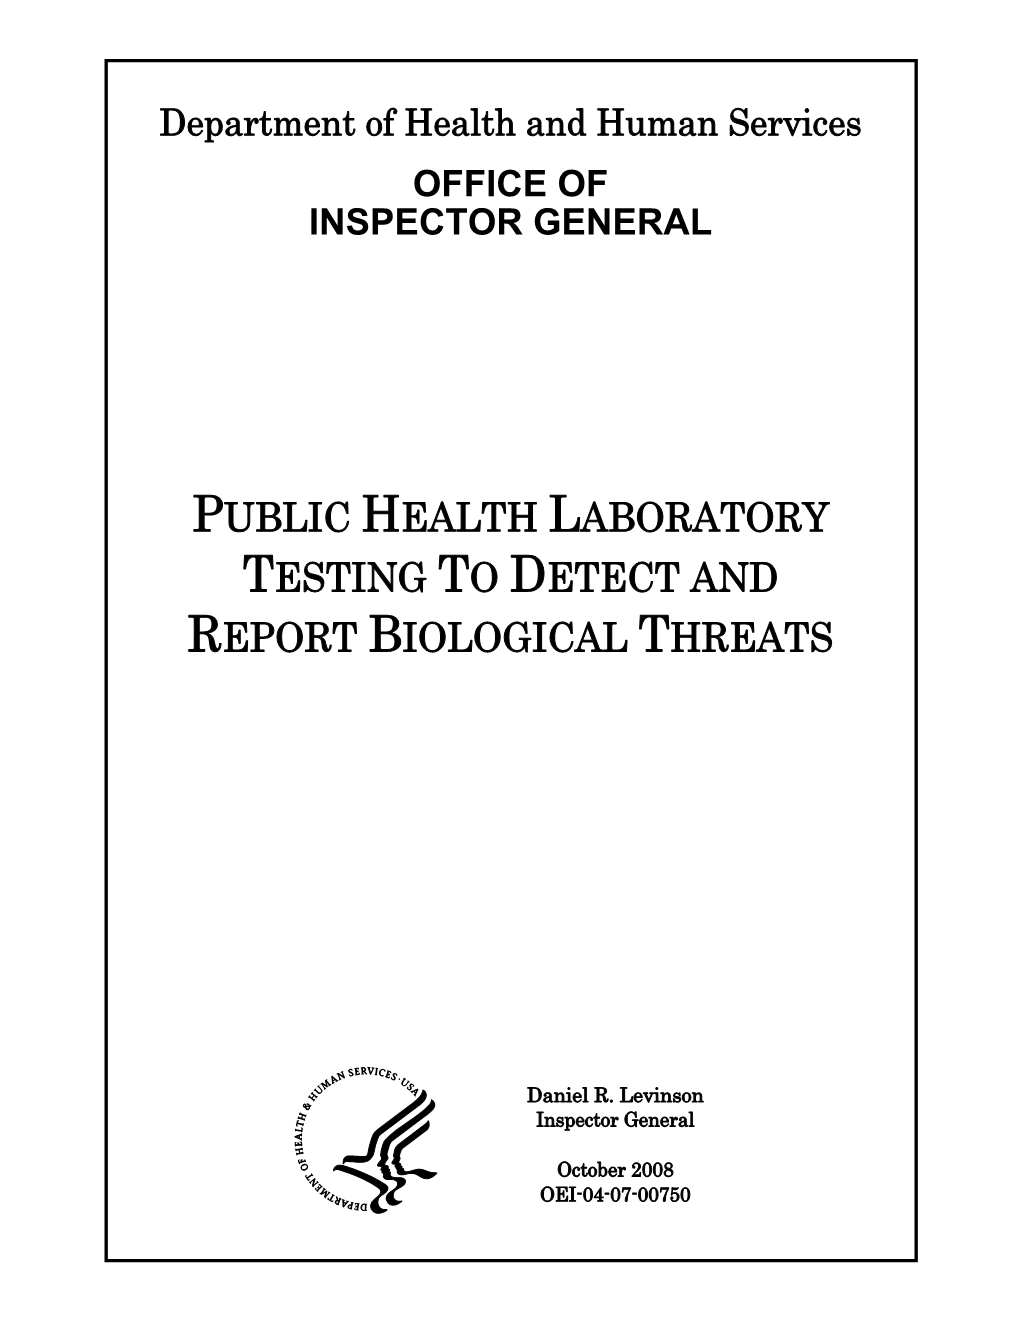 Public Health Laboratory Testing to Detect and Report Biological Threats